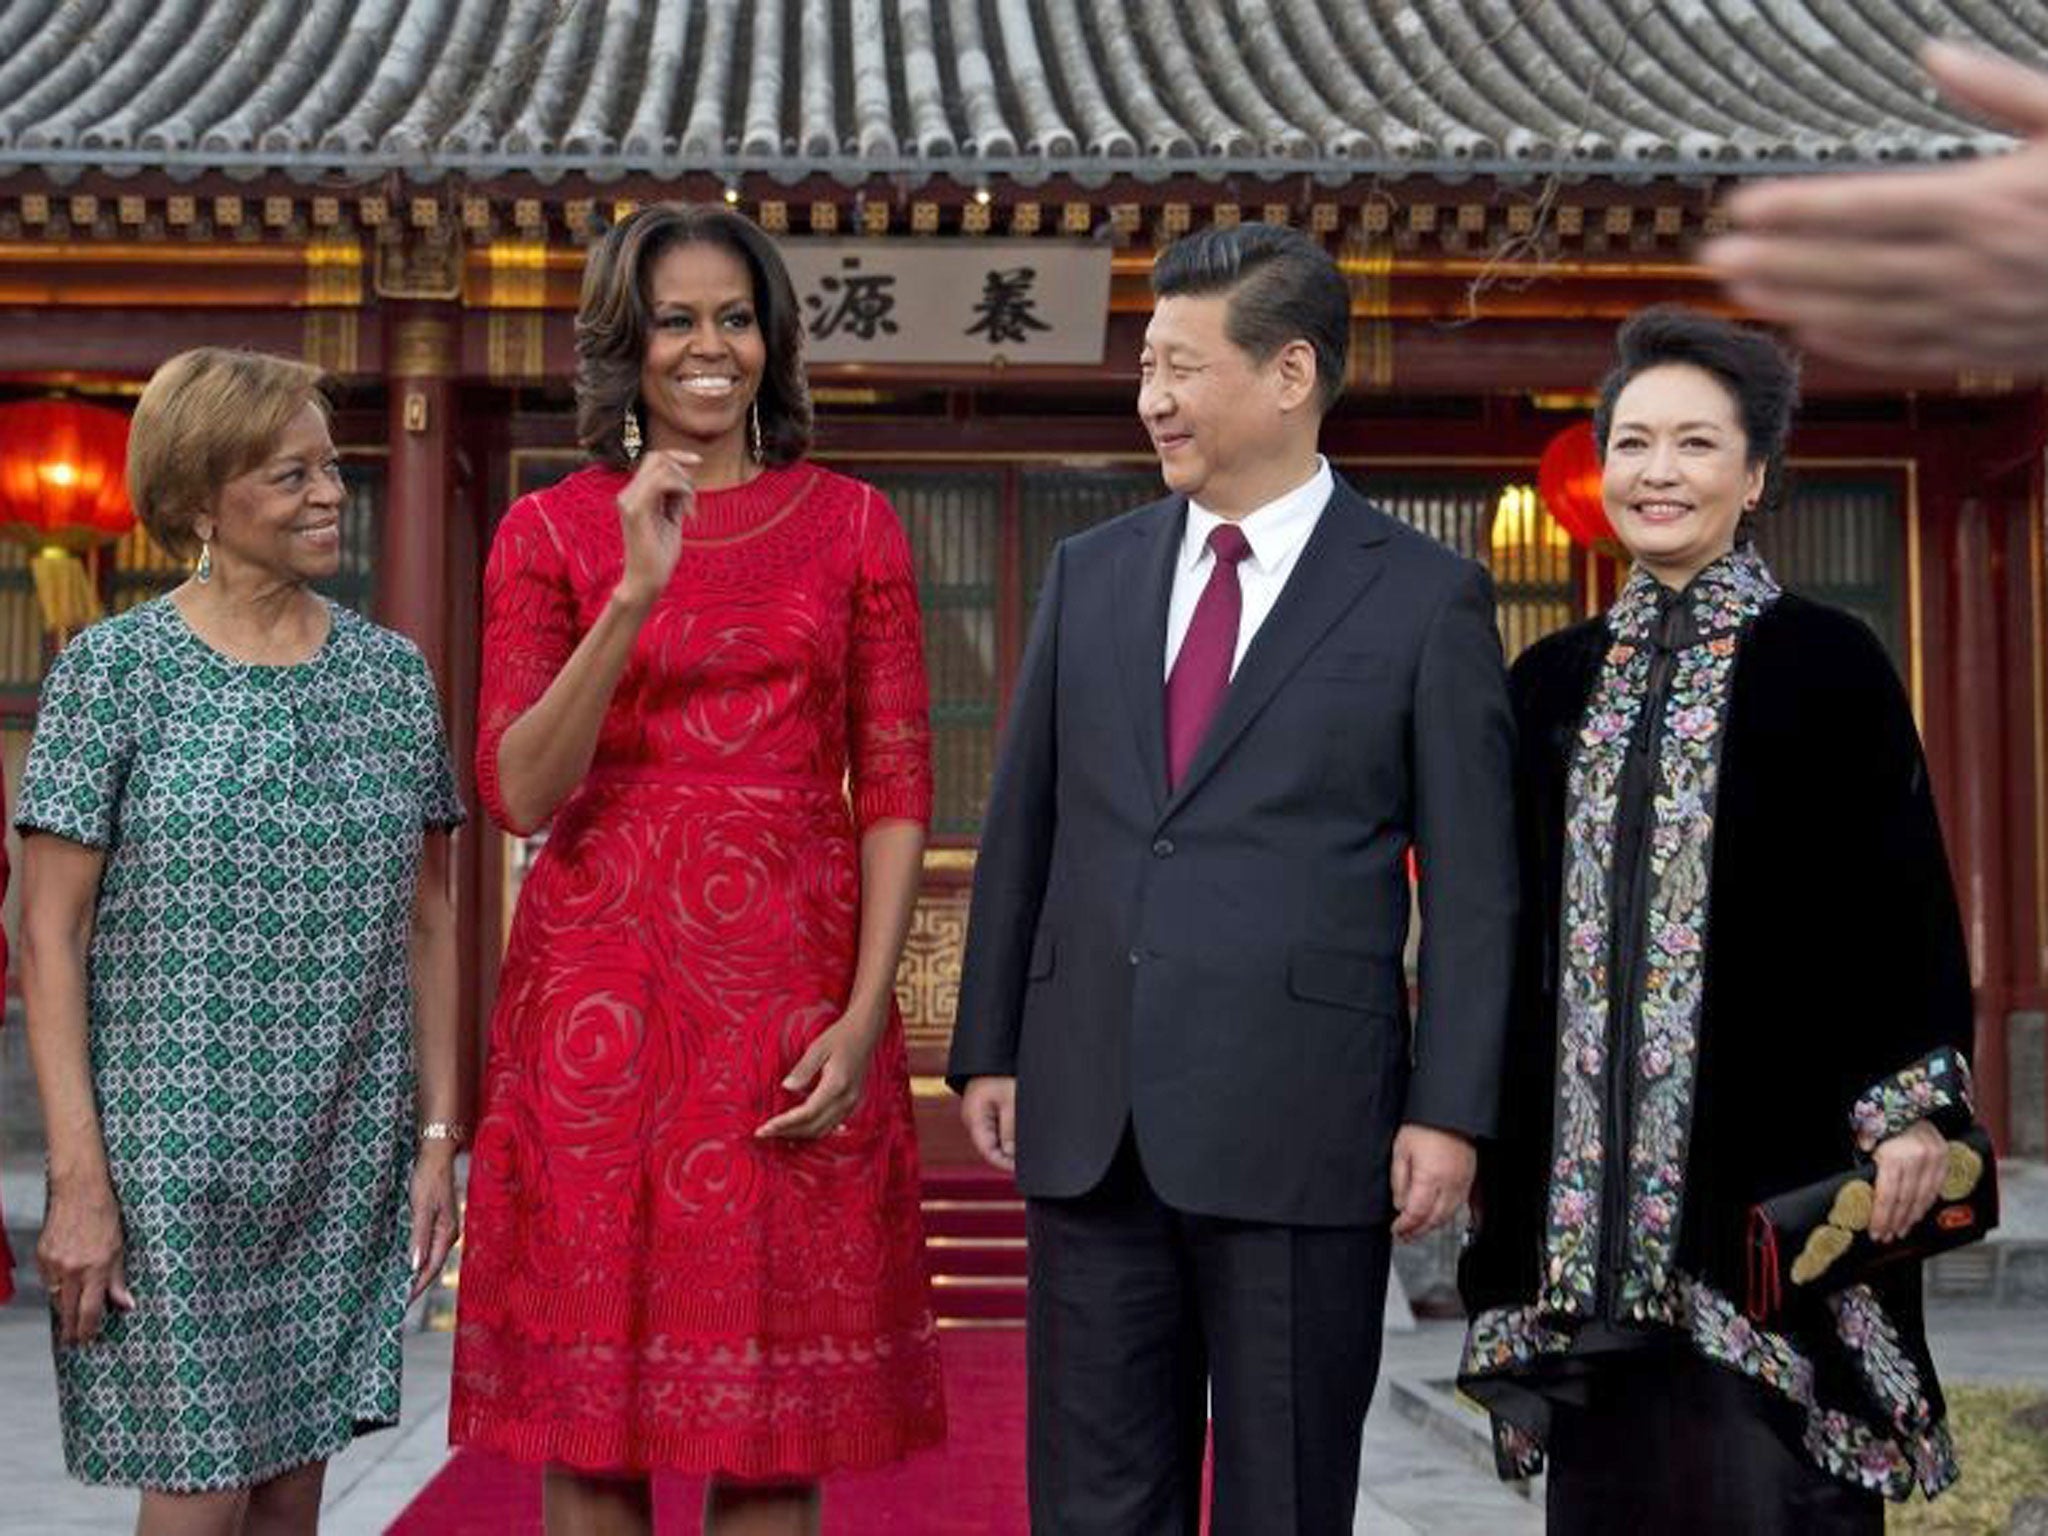 US first lady Michelle Obama (2nd L) and her mother Marian Robinson (L) share a light moment with Chinese President Xi Jinping (2nd R) and his wife Peng Liyuan